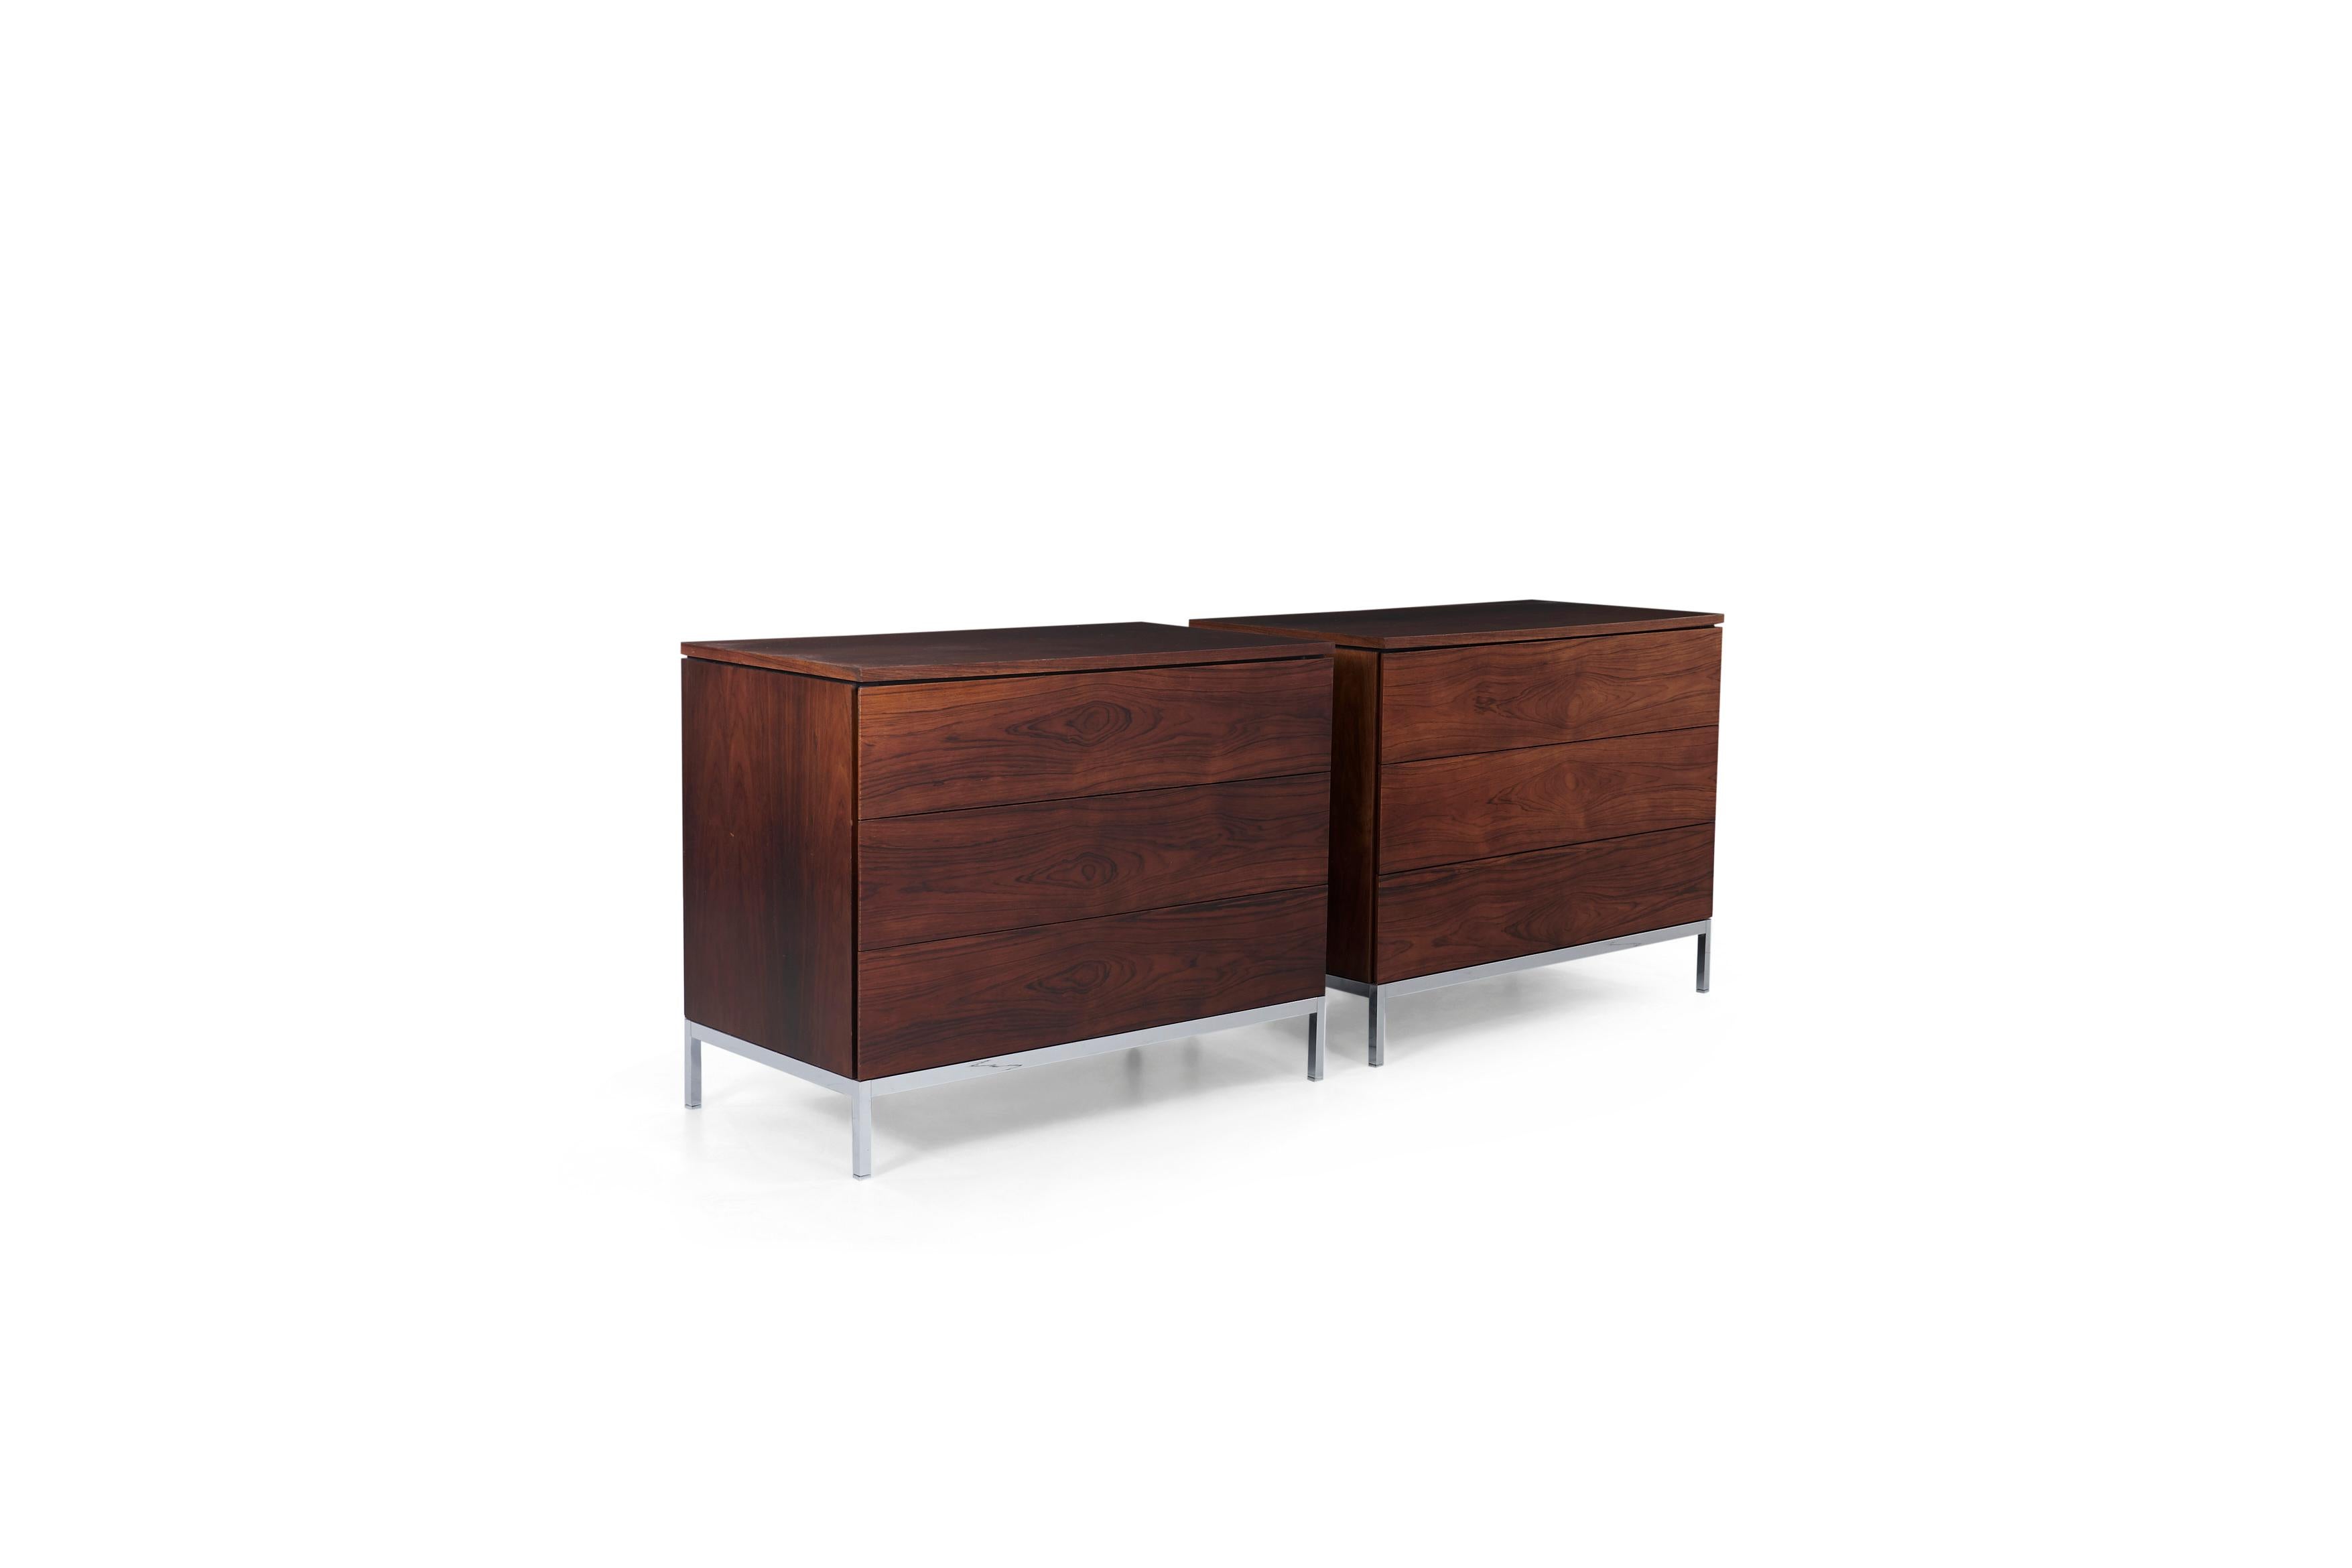 Florence Knoll for Knoll International, pair of dressers, highly figured book matched rosewood veneer, chrome plated steel base, solid steel legs with adjustable glides, 3 drawers each case, beveled edges each side of drawer function as pulls for